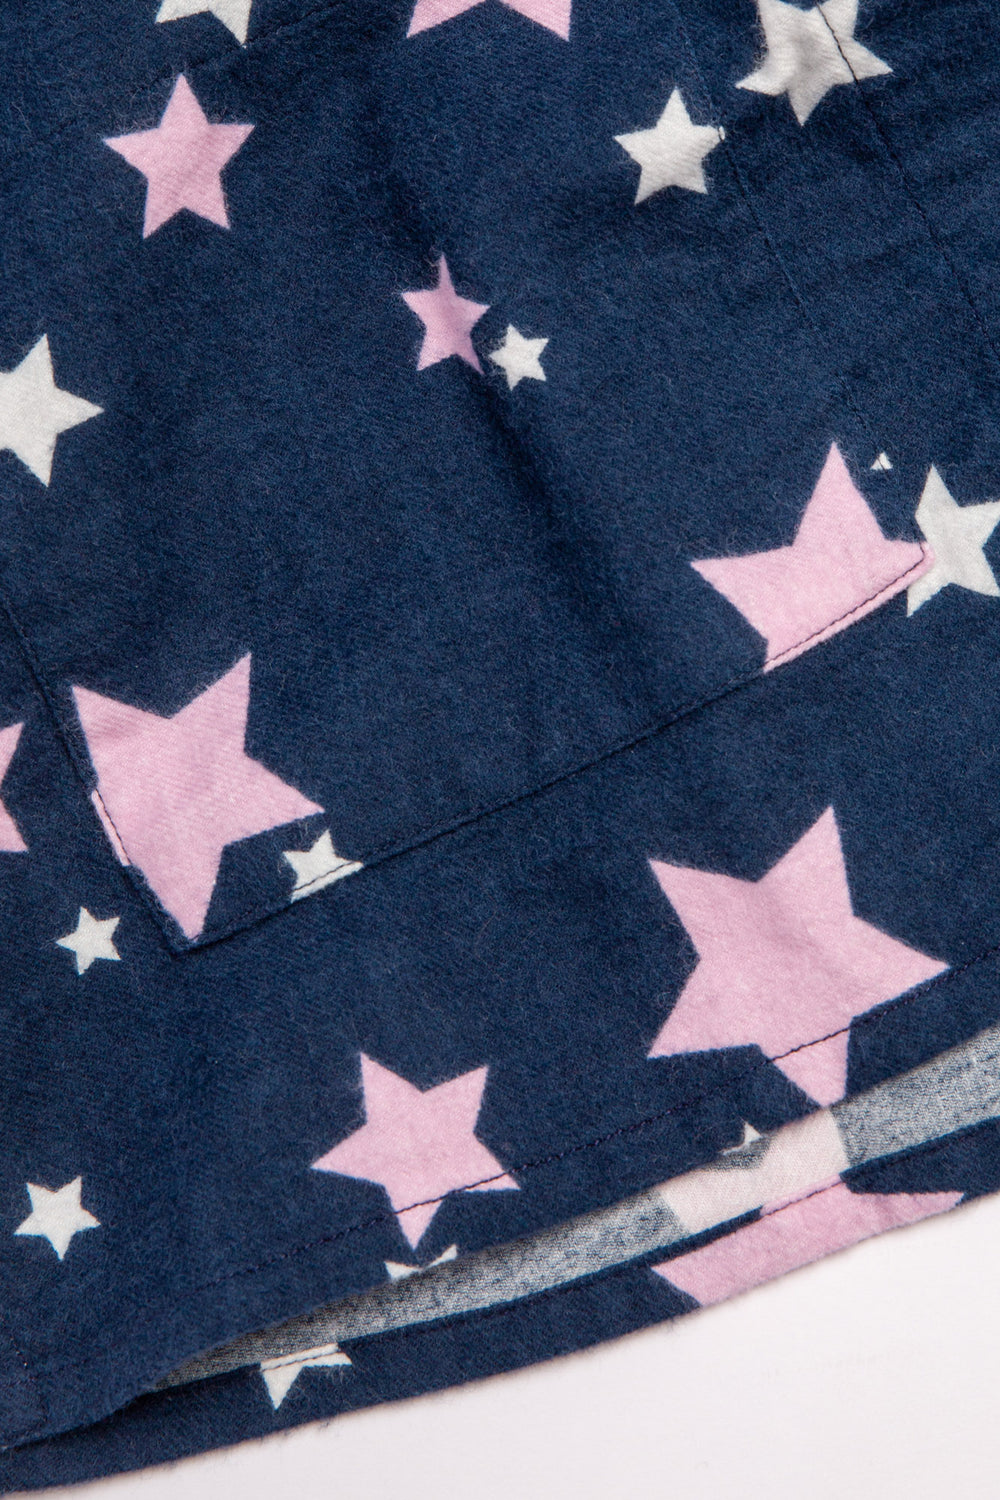 Cotton flannel pj set in navy star print. Embroidered 'Rise & Shine & hair wrap. (7231870042212)